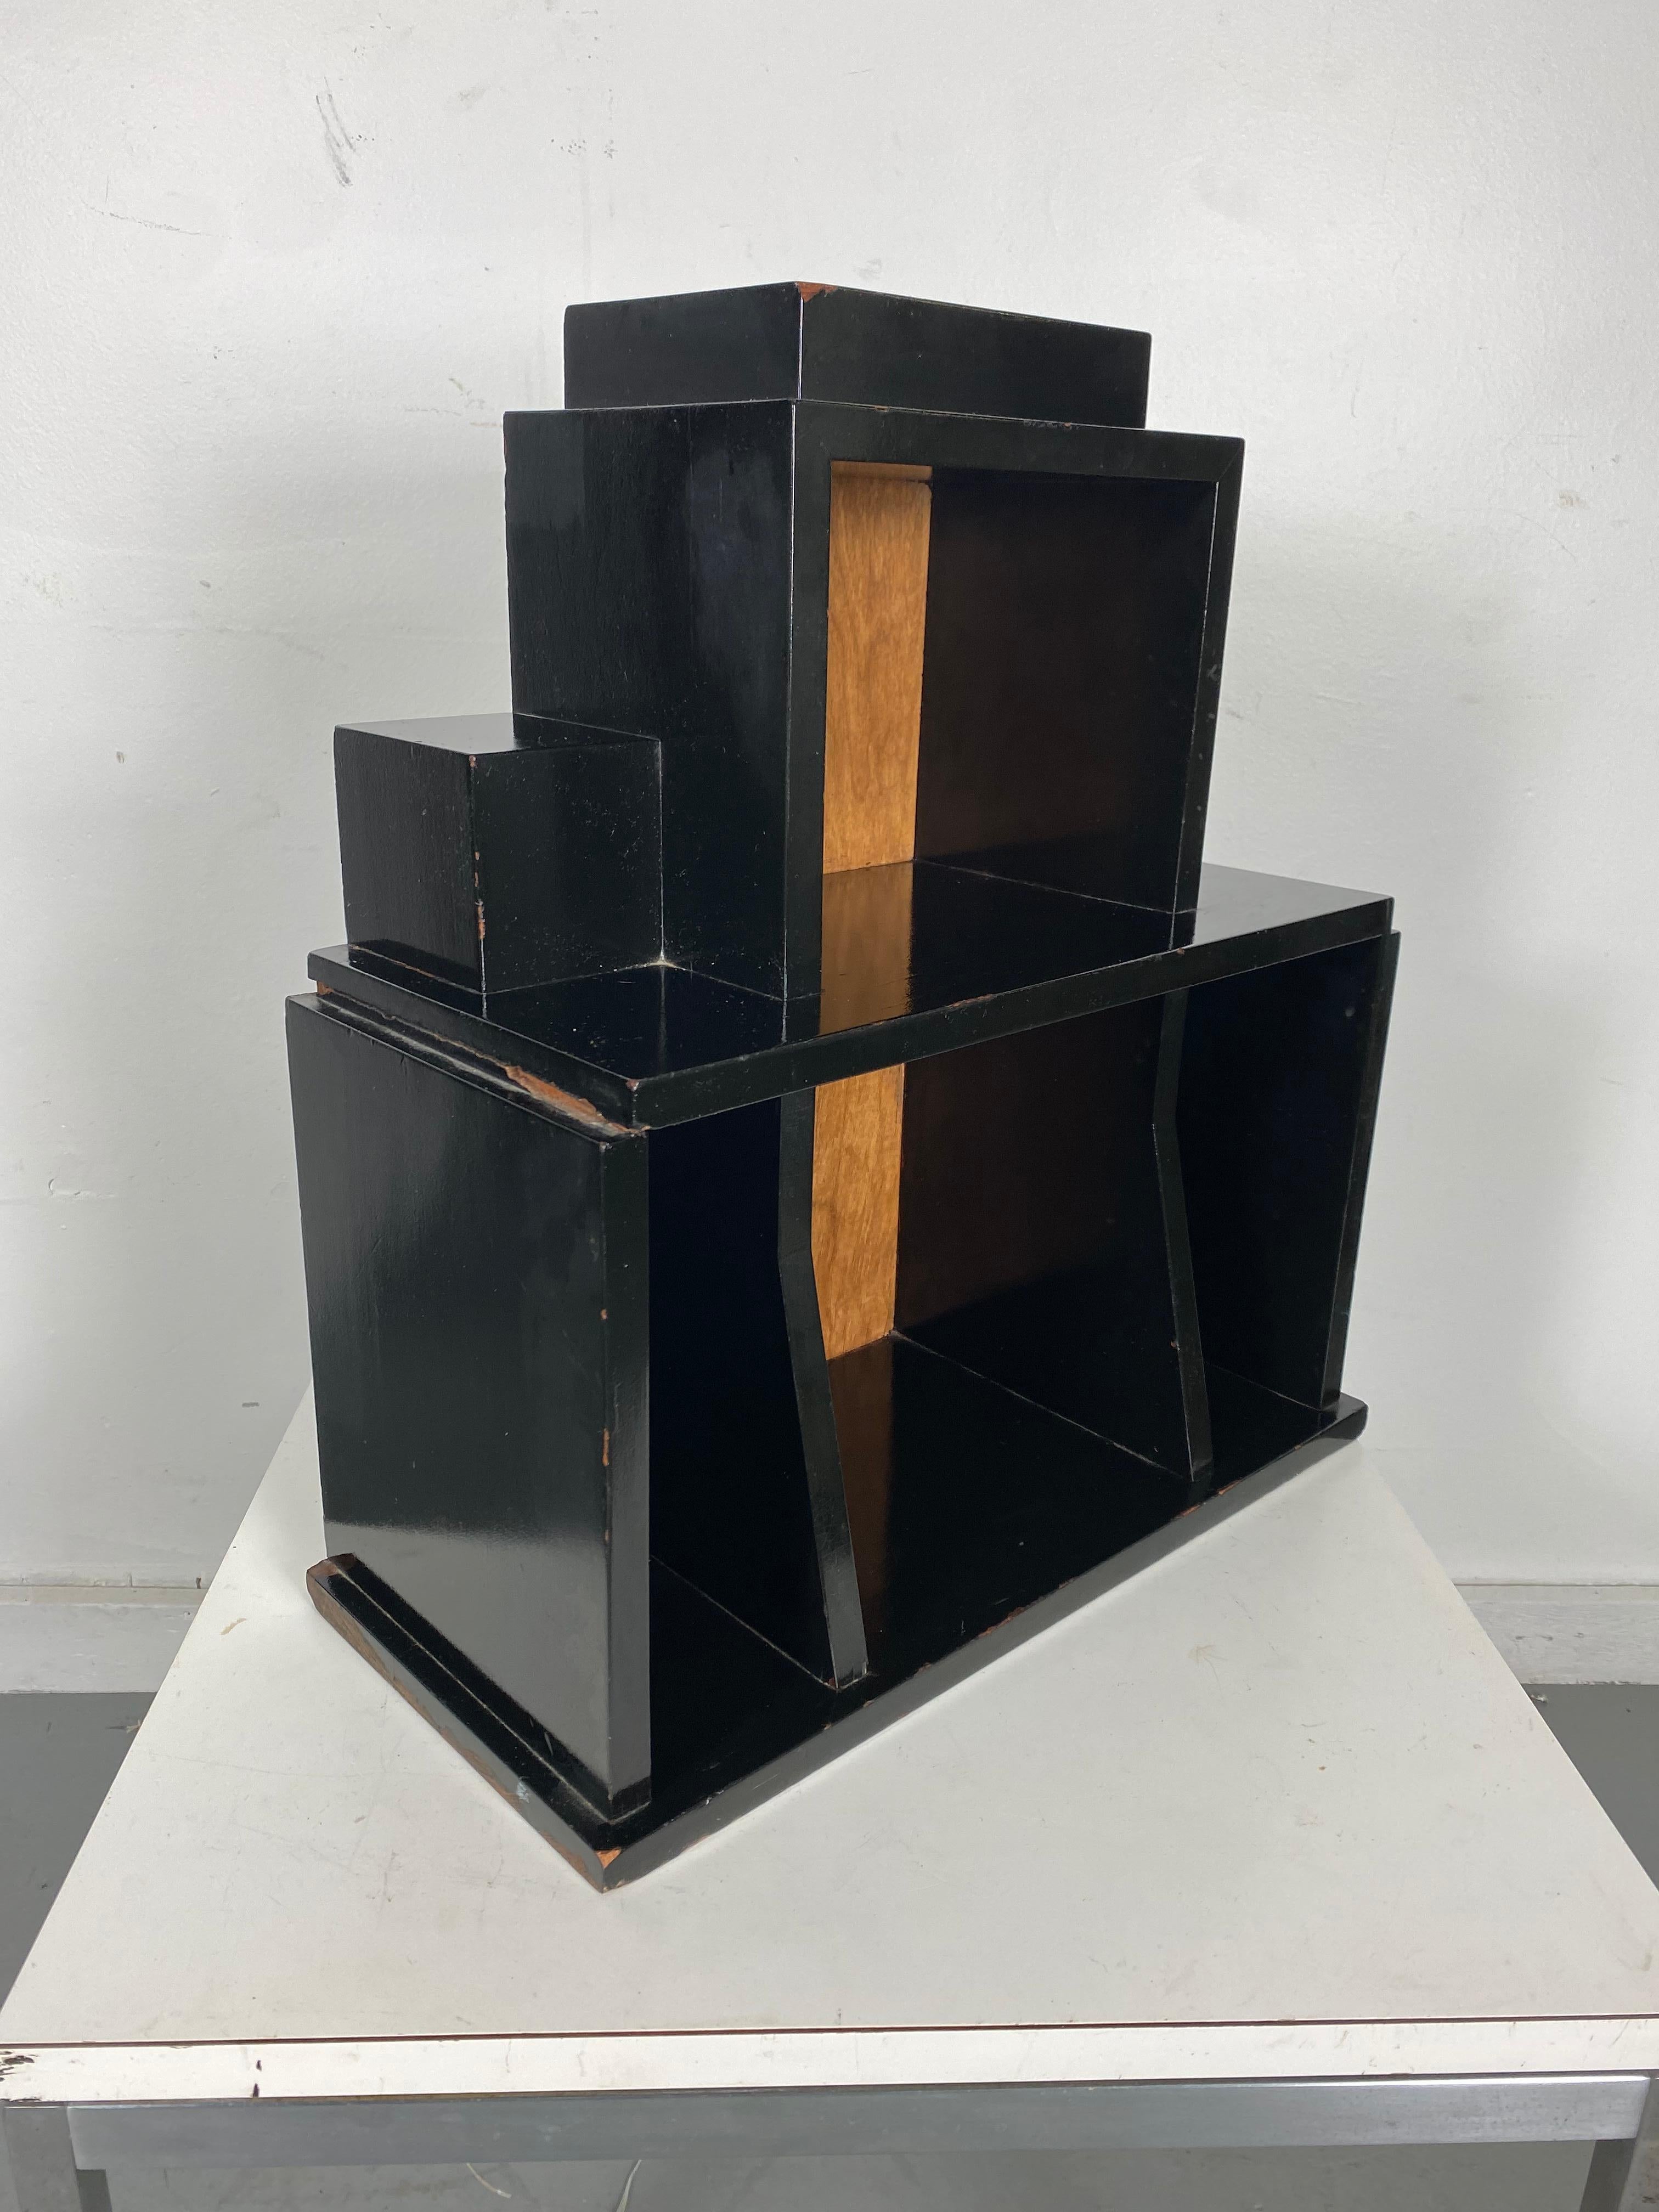 Early 20th Century Diminutive Stand / Table Art Deco Skyscraper Furniture Designed by Paul Frankl For Sale